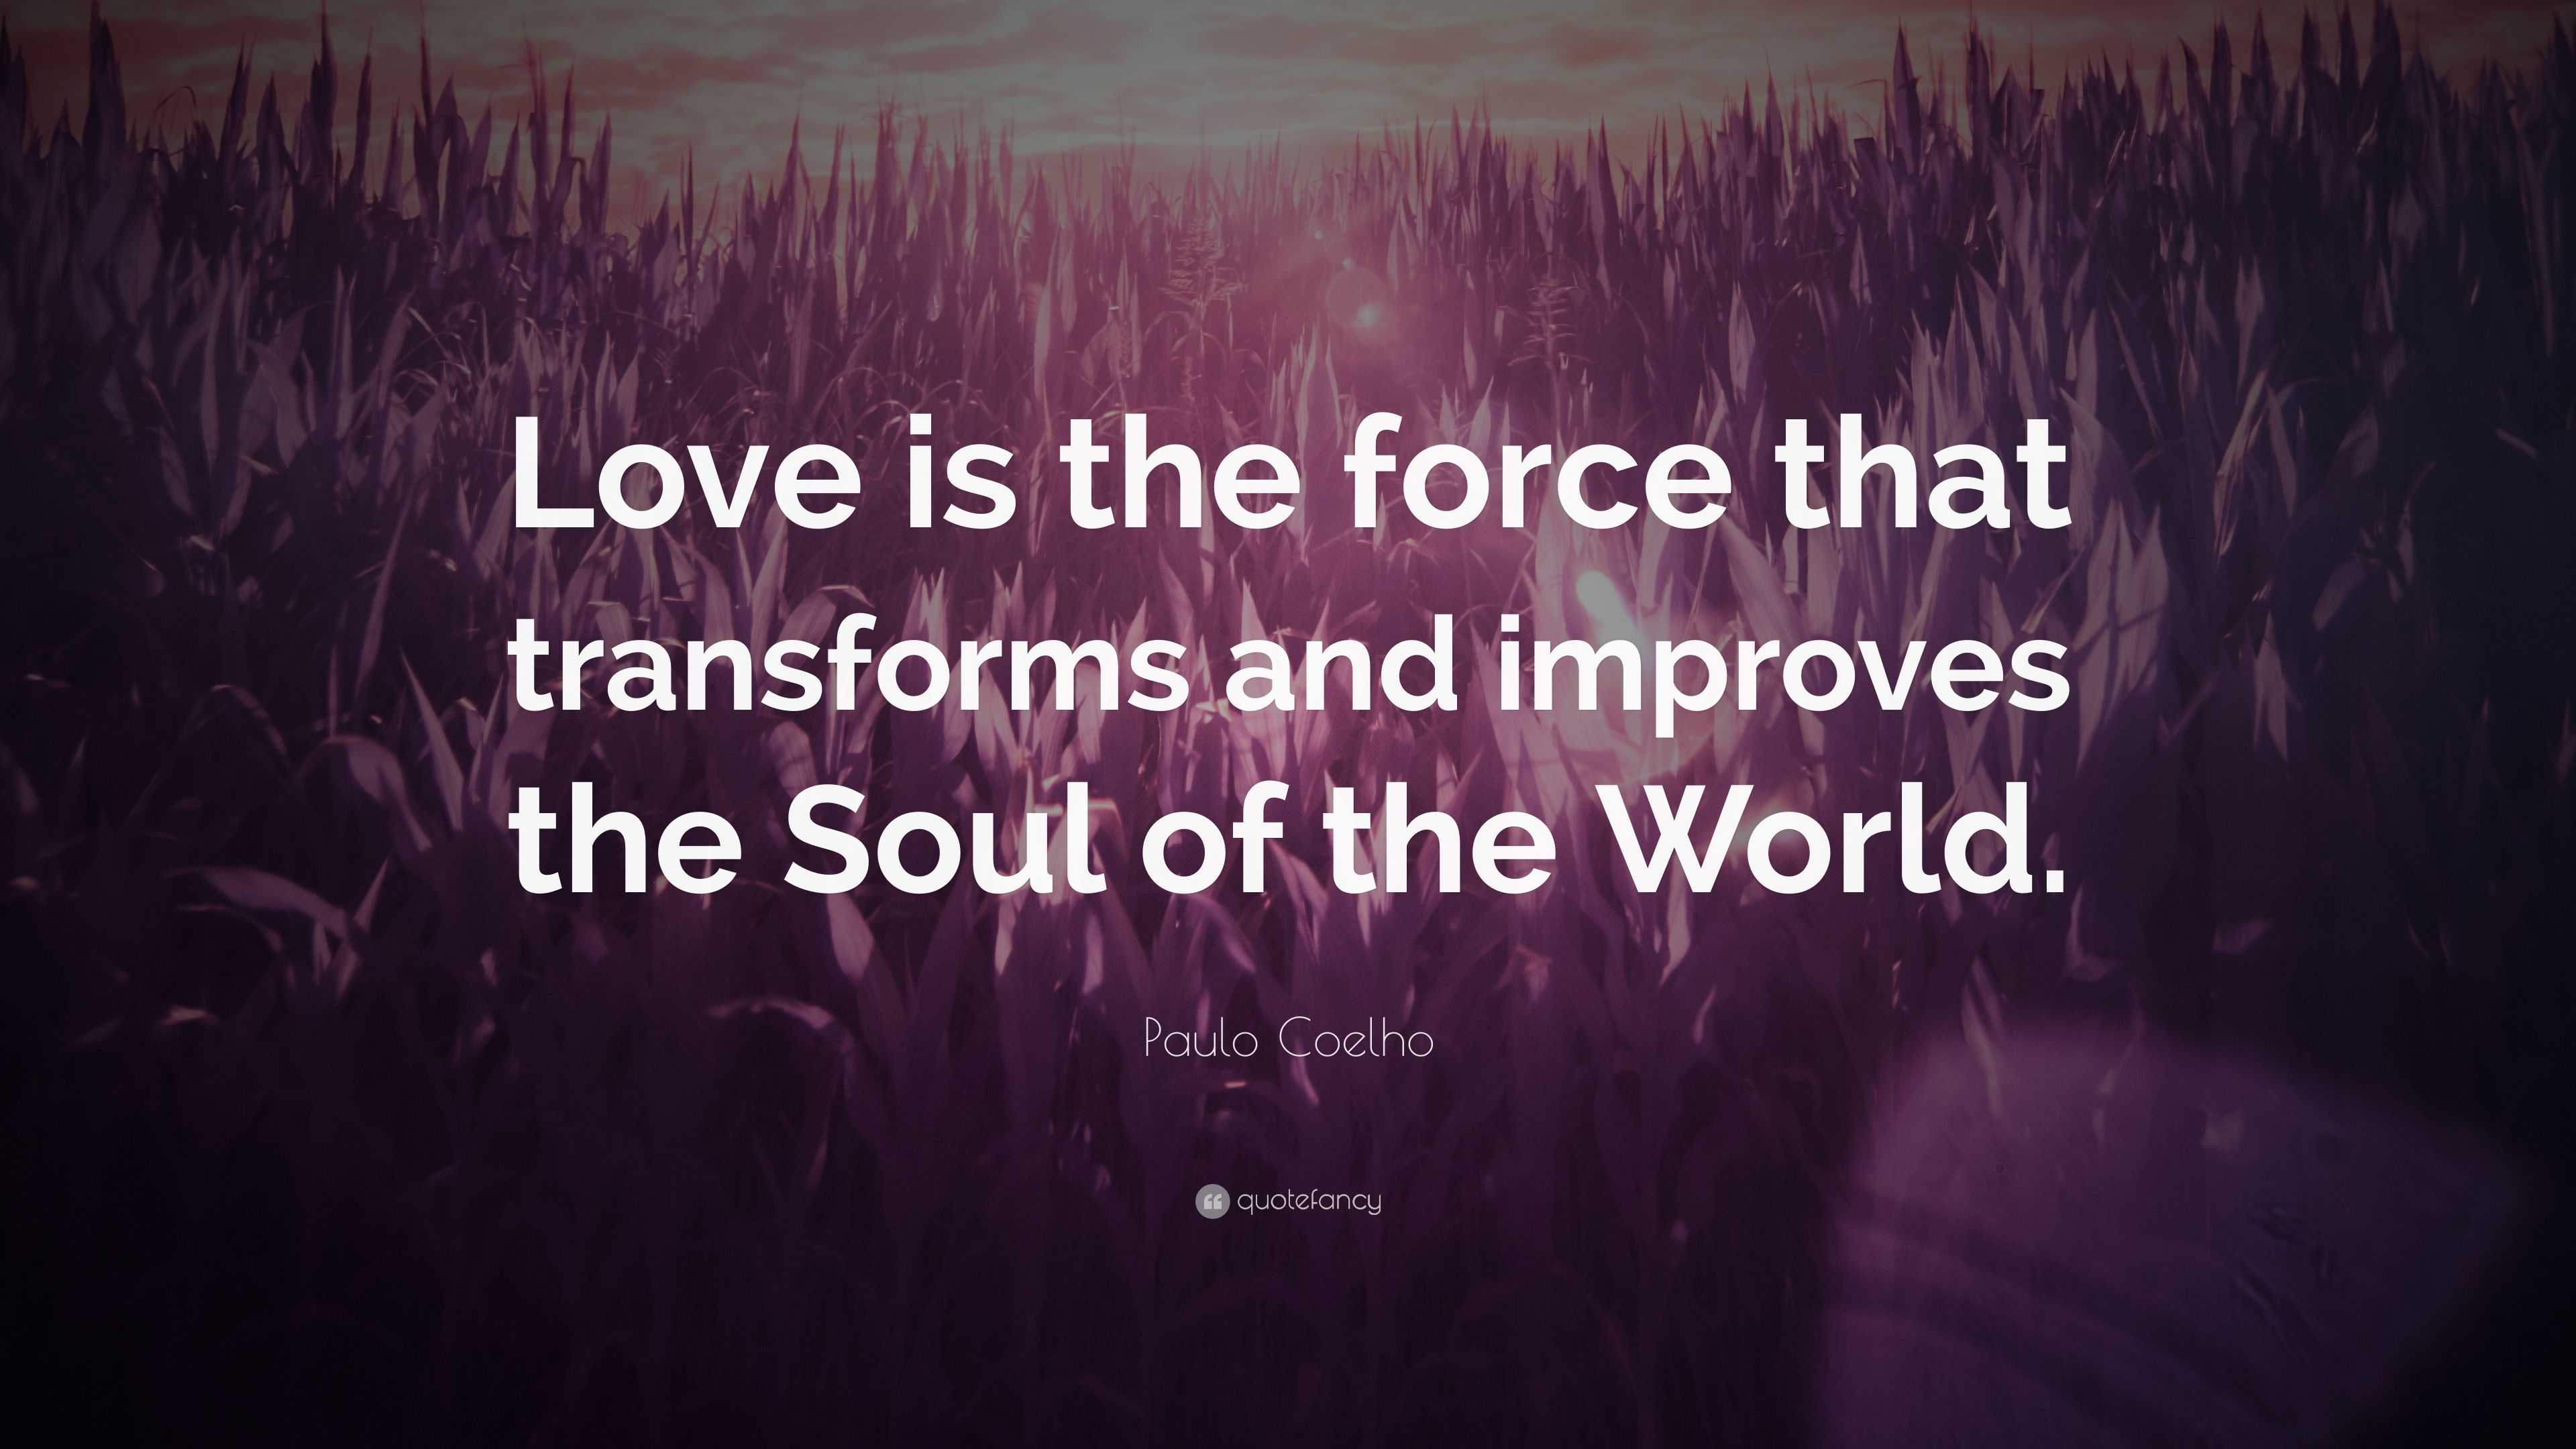 Paulo Coelho Quote “Love is the force that transforms and